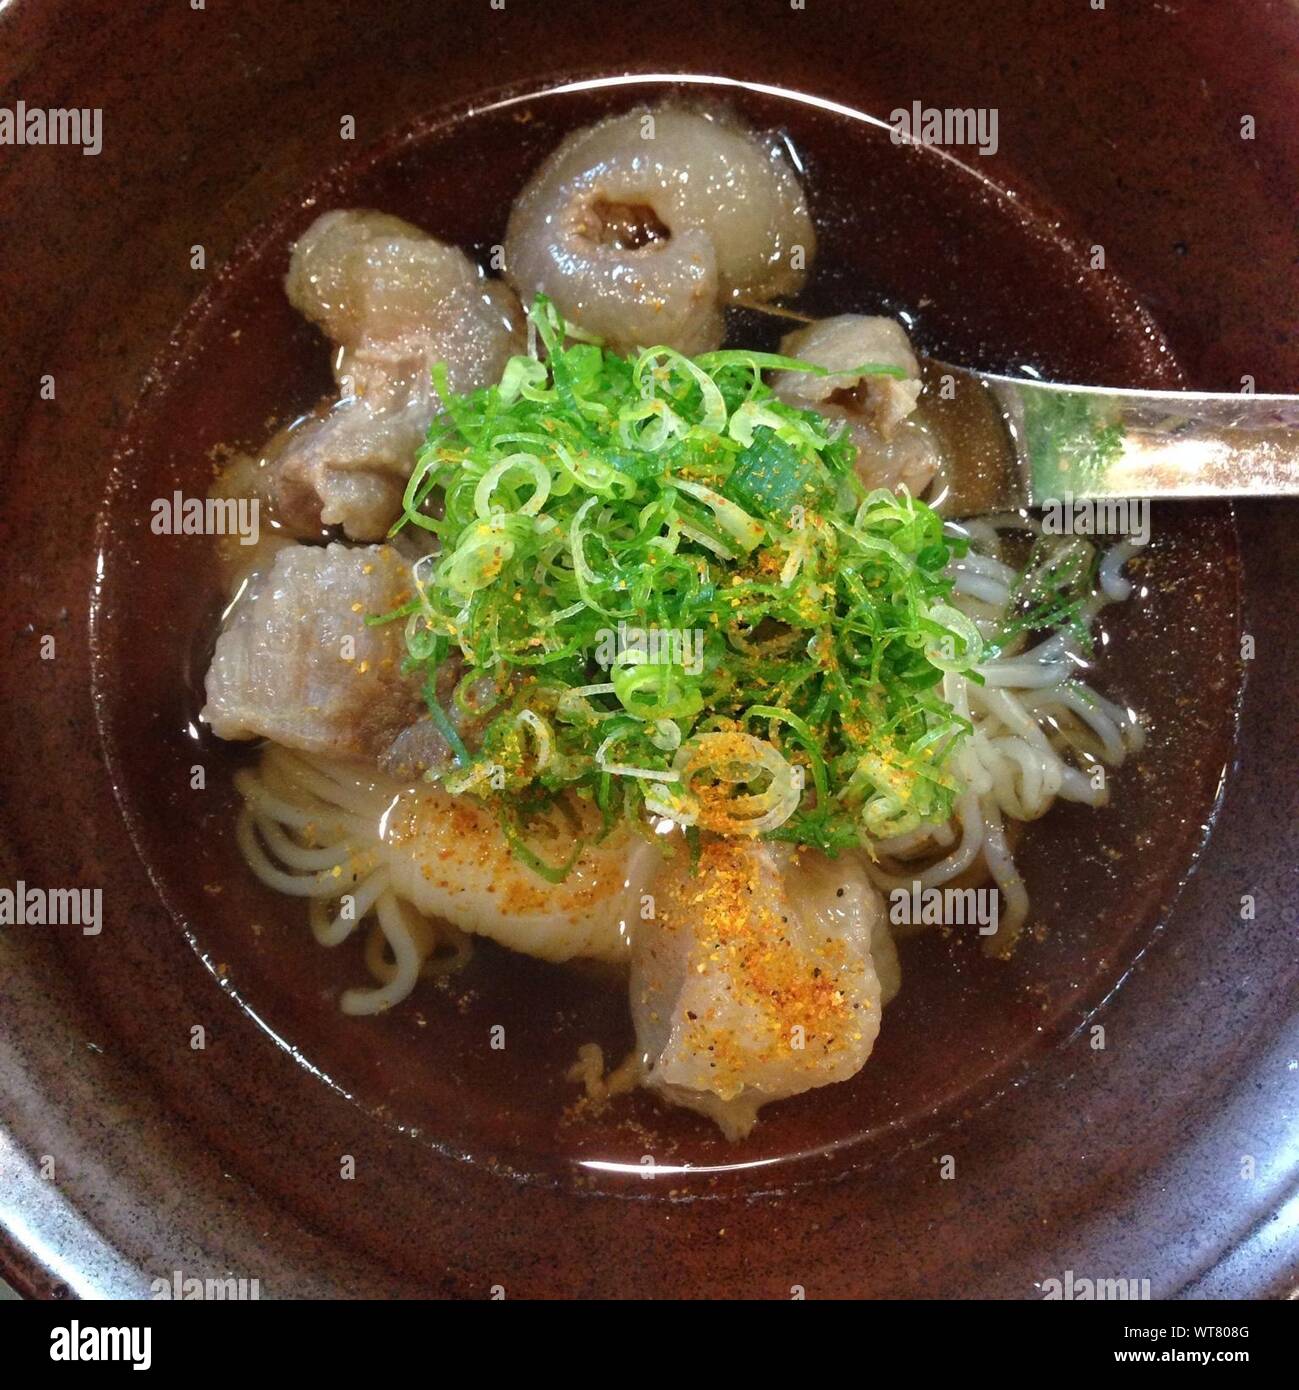 Close Up Of Asian Cuisine Stock Photo